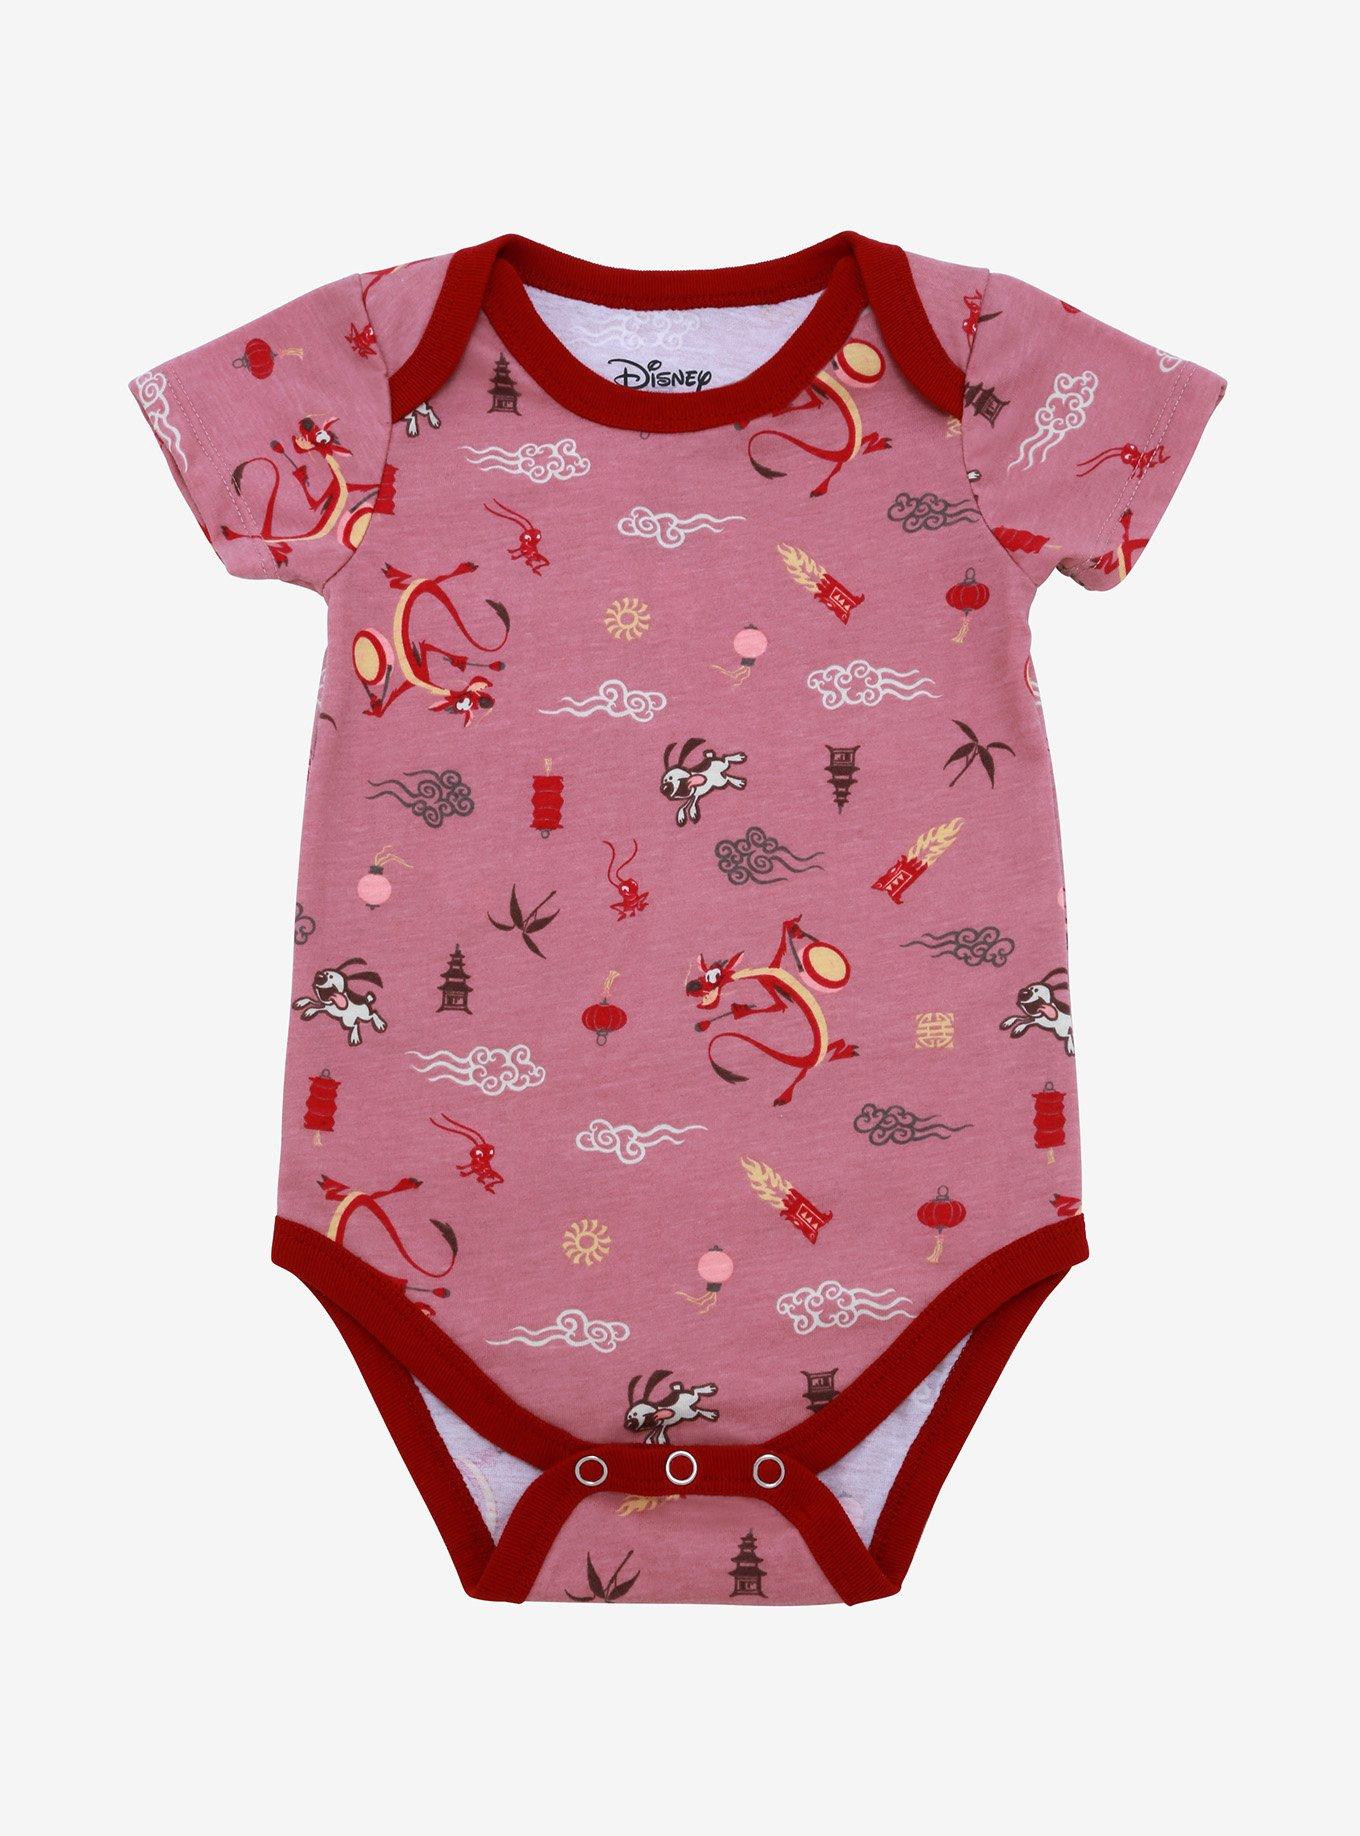 Our Universe Disney Mulan Mushu Allover Print Infant Bodysuit - BoxLunch Exclusive, RED, hi-res